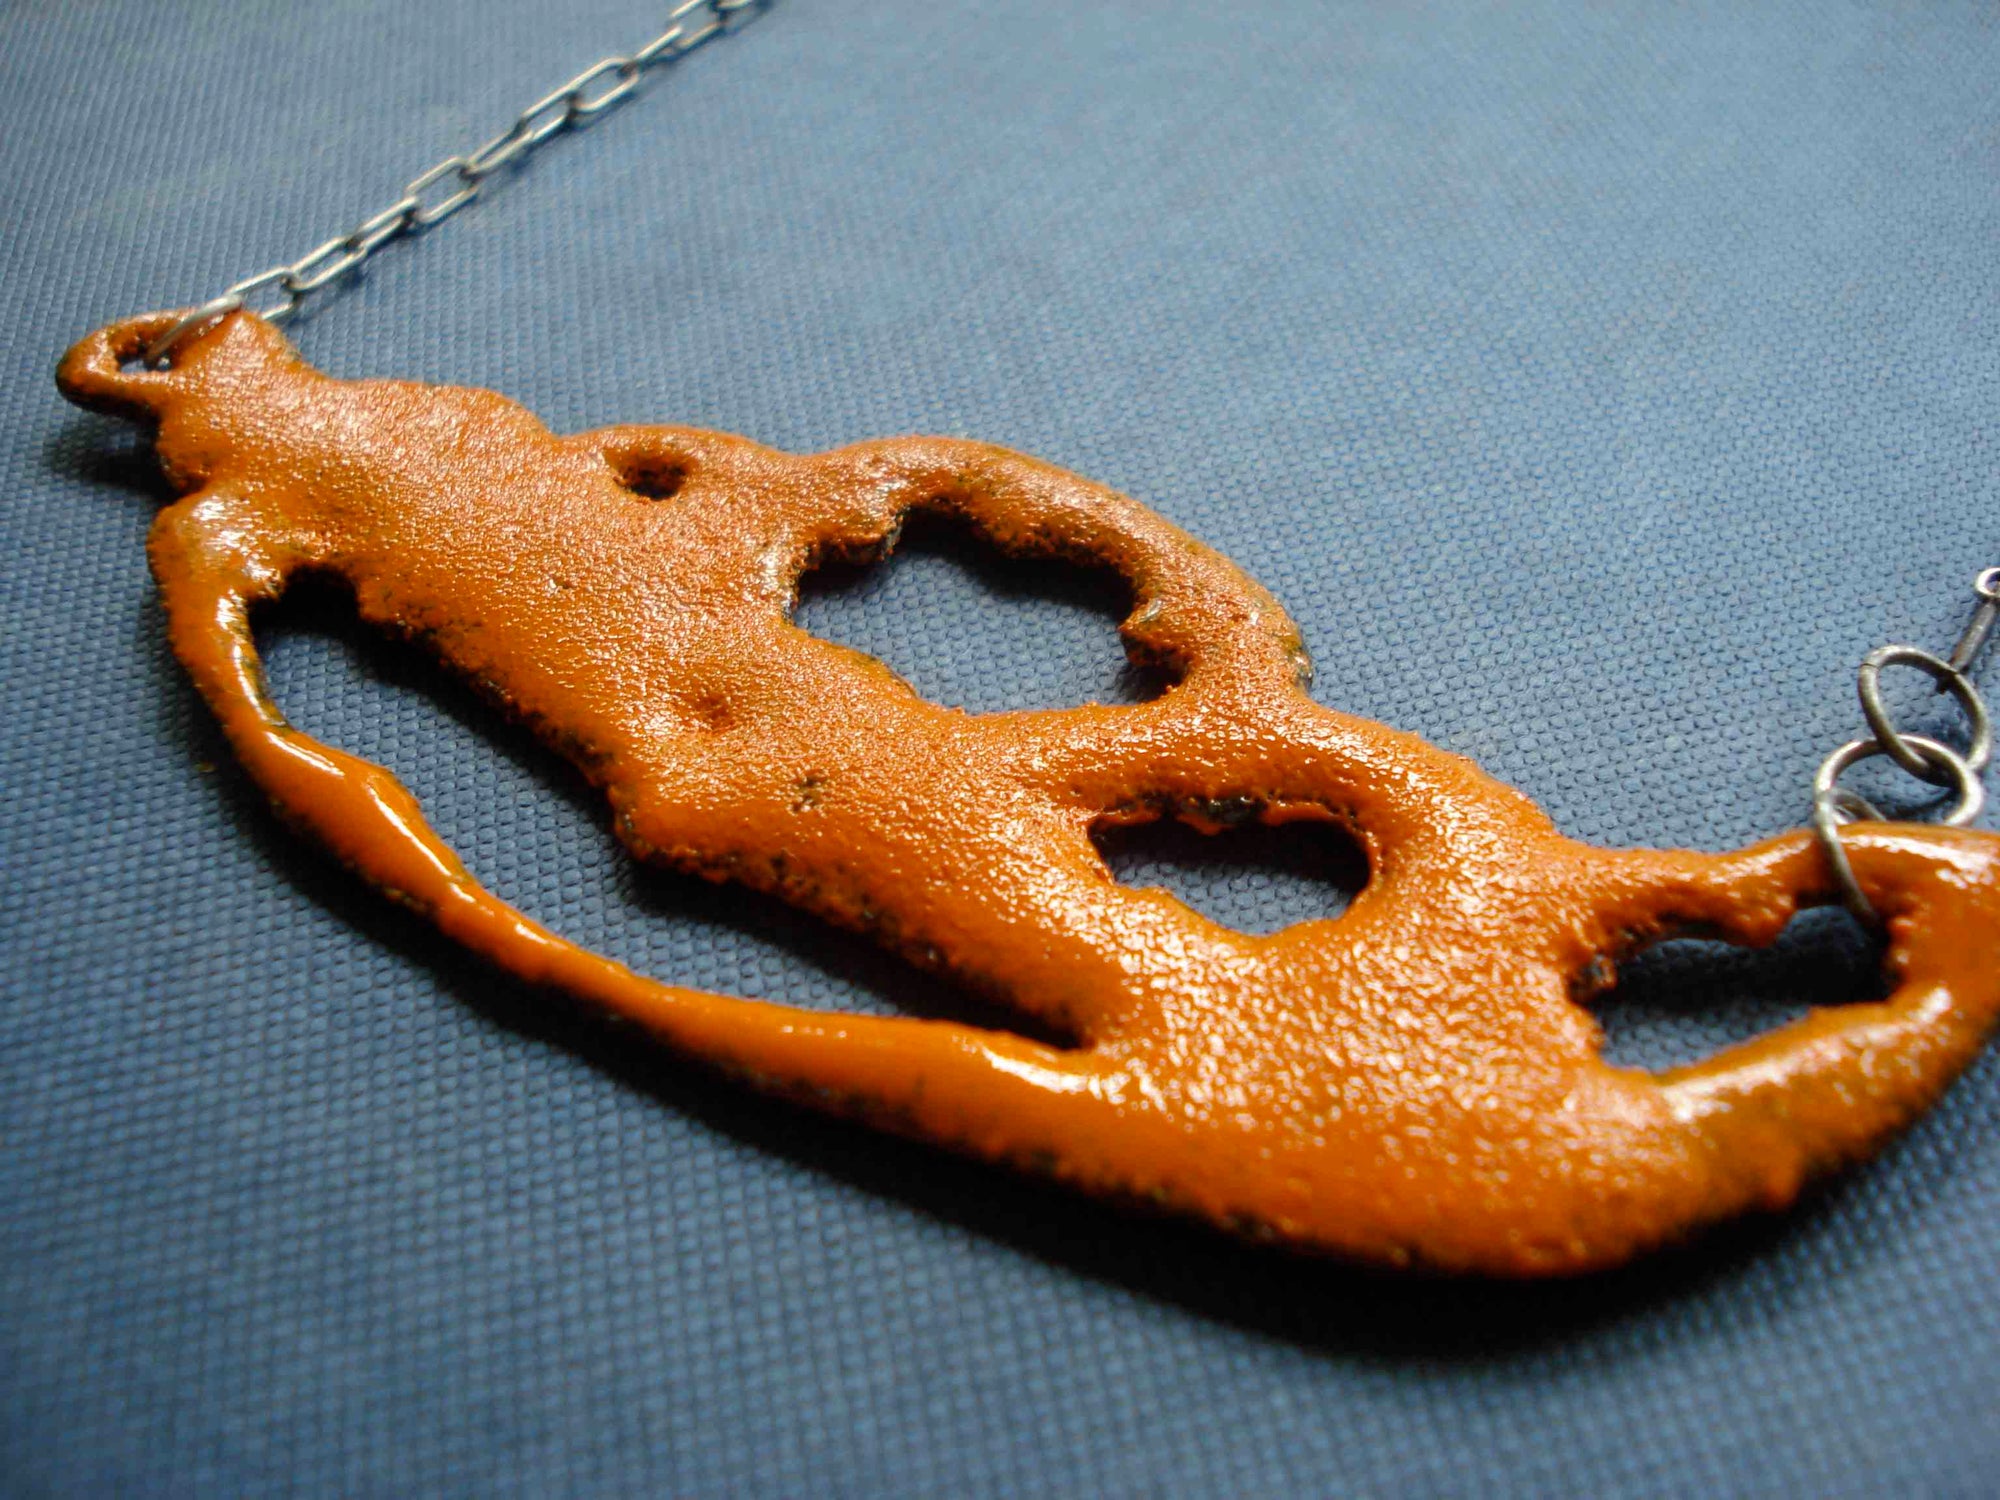 Vitreous enamel bright orange and marigold glass enamel phasmid necklace. phasmid is the sensory organ of some parasites. this necklace is handmade with a granular sugar fired finish by Peggy Skemp 2008. Photo with orange bubbles by AJ Kane 